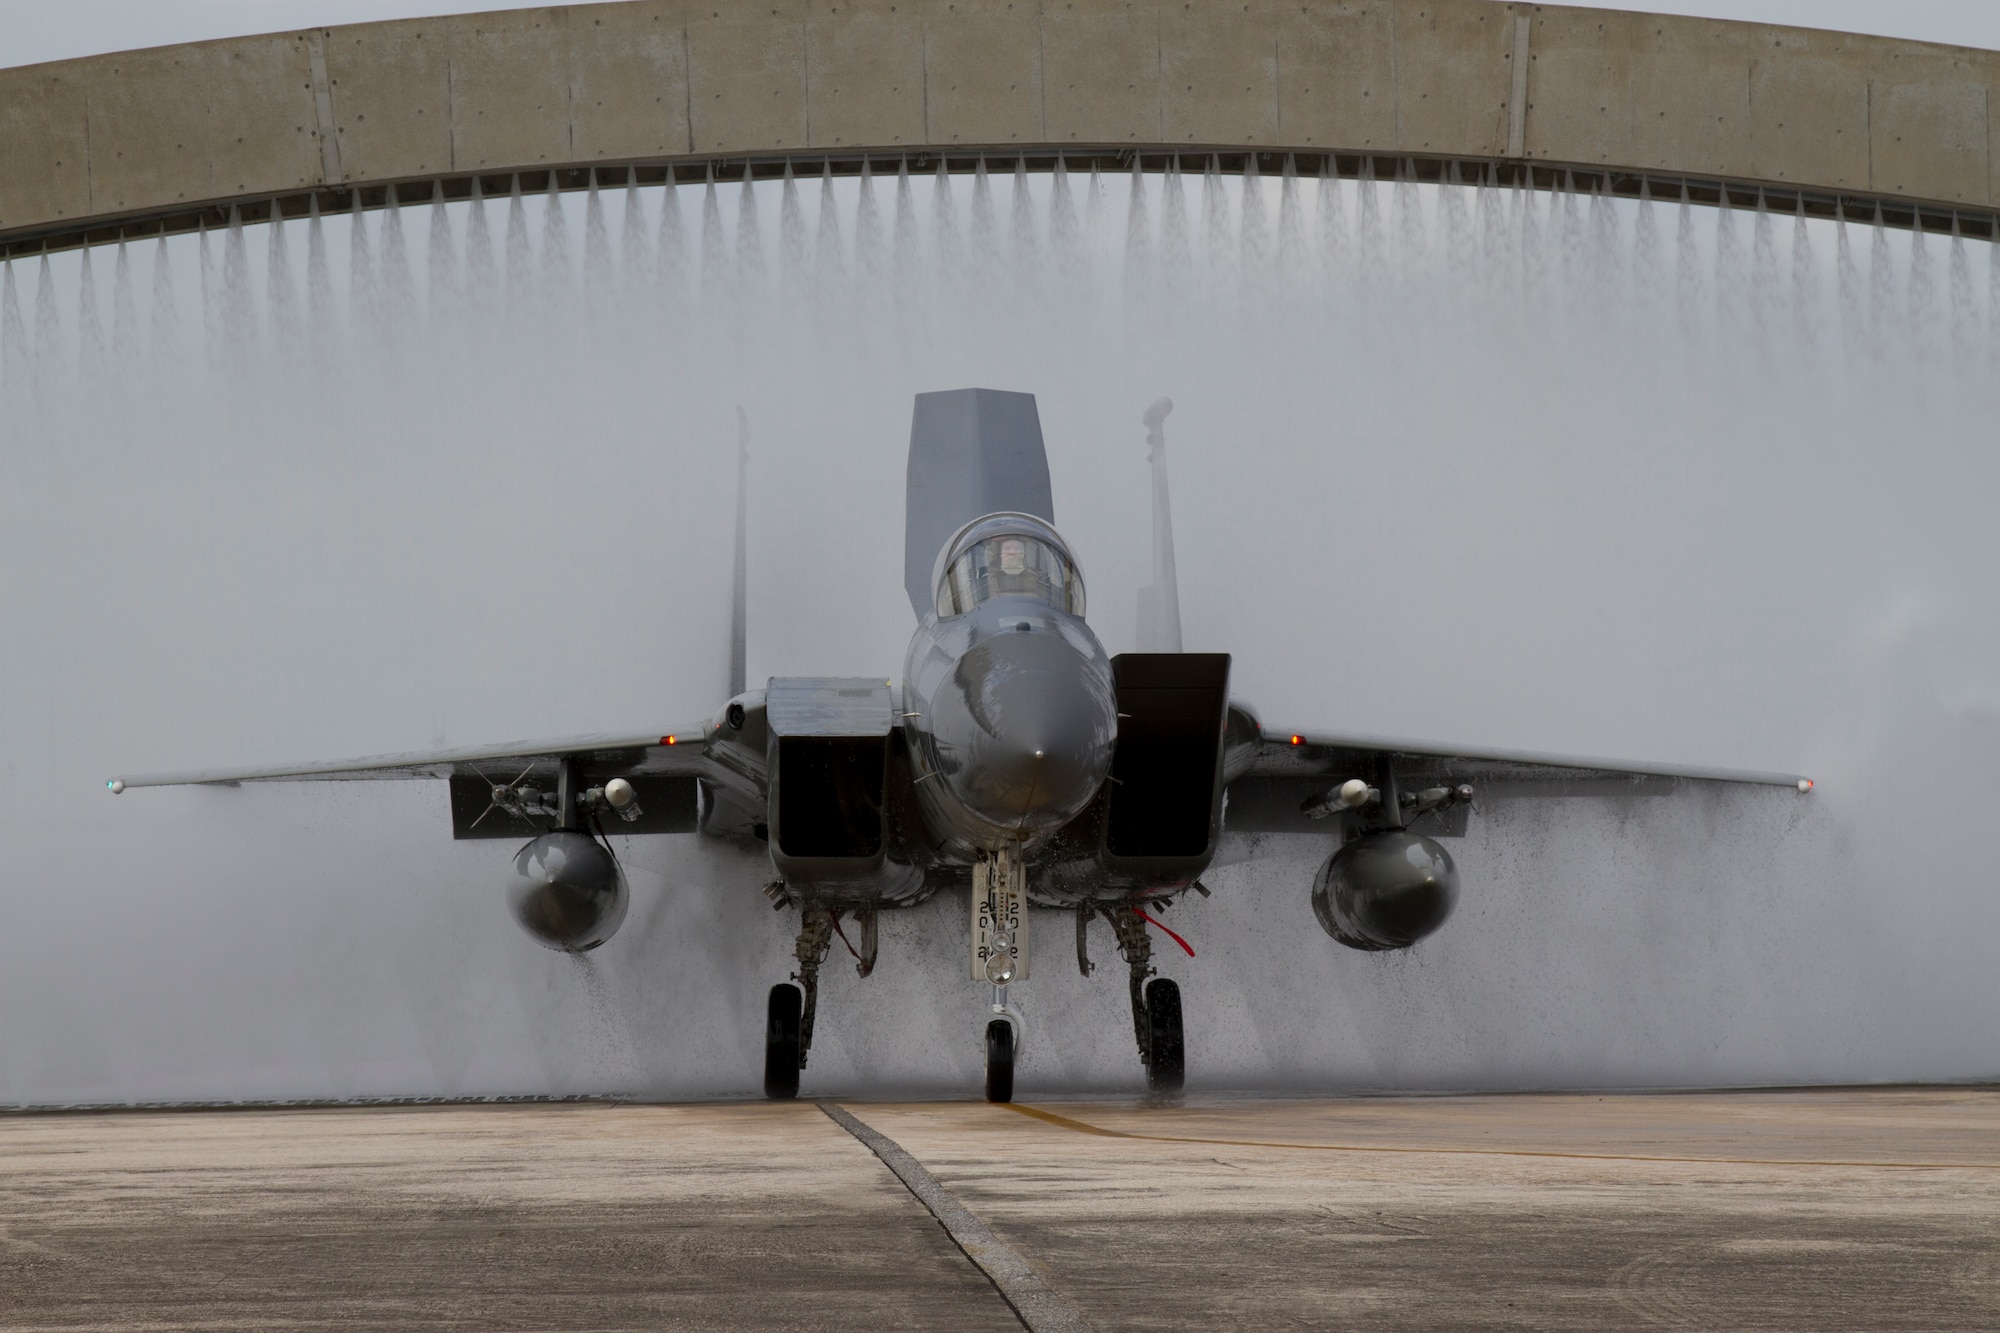 A 44th Fighter Squadron F-15 Eagle fighter aircraft goes through a "bat bath" on Kadena Air Base, Japan. The "Vampire Bats" run their aircraft through the bath after the last sortie each day to wash off salt water. (Courtesy photo by Jake Melampy)